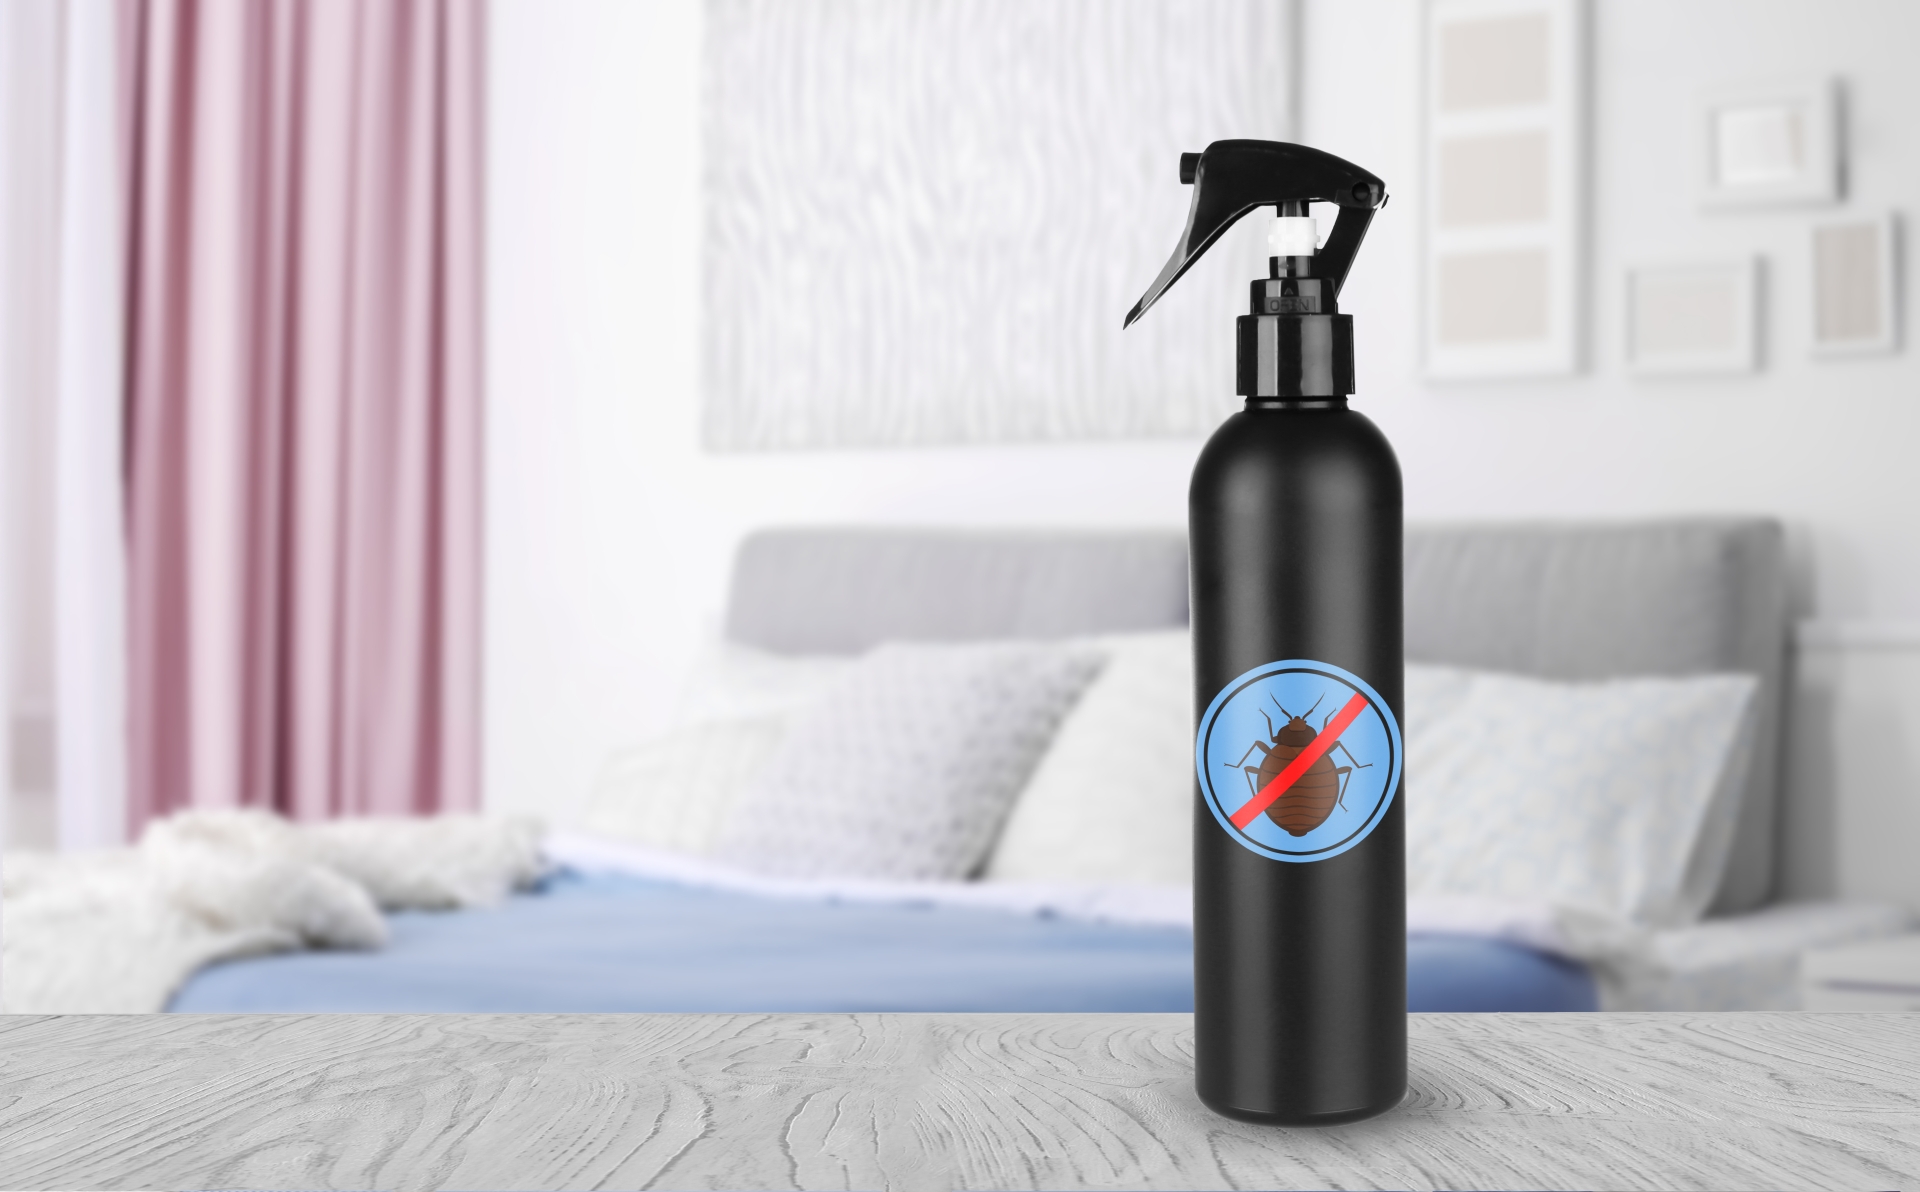 Bed Bug Exterminator, Pest Control in Cockfosters, East Barnet, EN4. Call Now 020 8166 9746